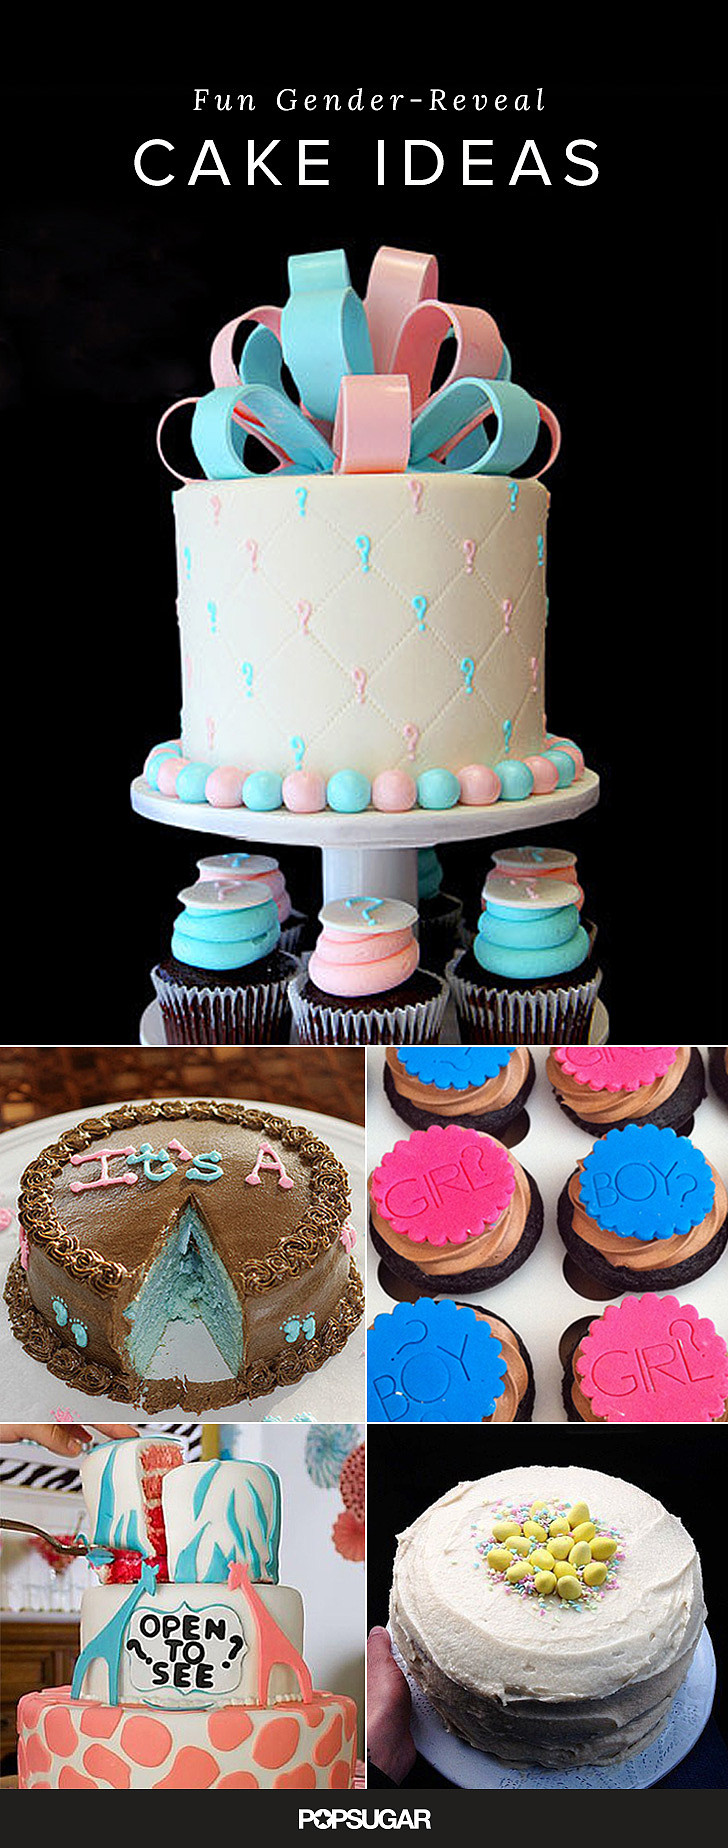 Cake Ideas For Gender Reveal Party
 Baby Toddlers Kids & Parenting